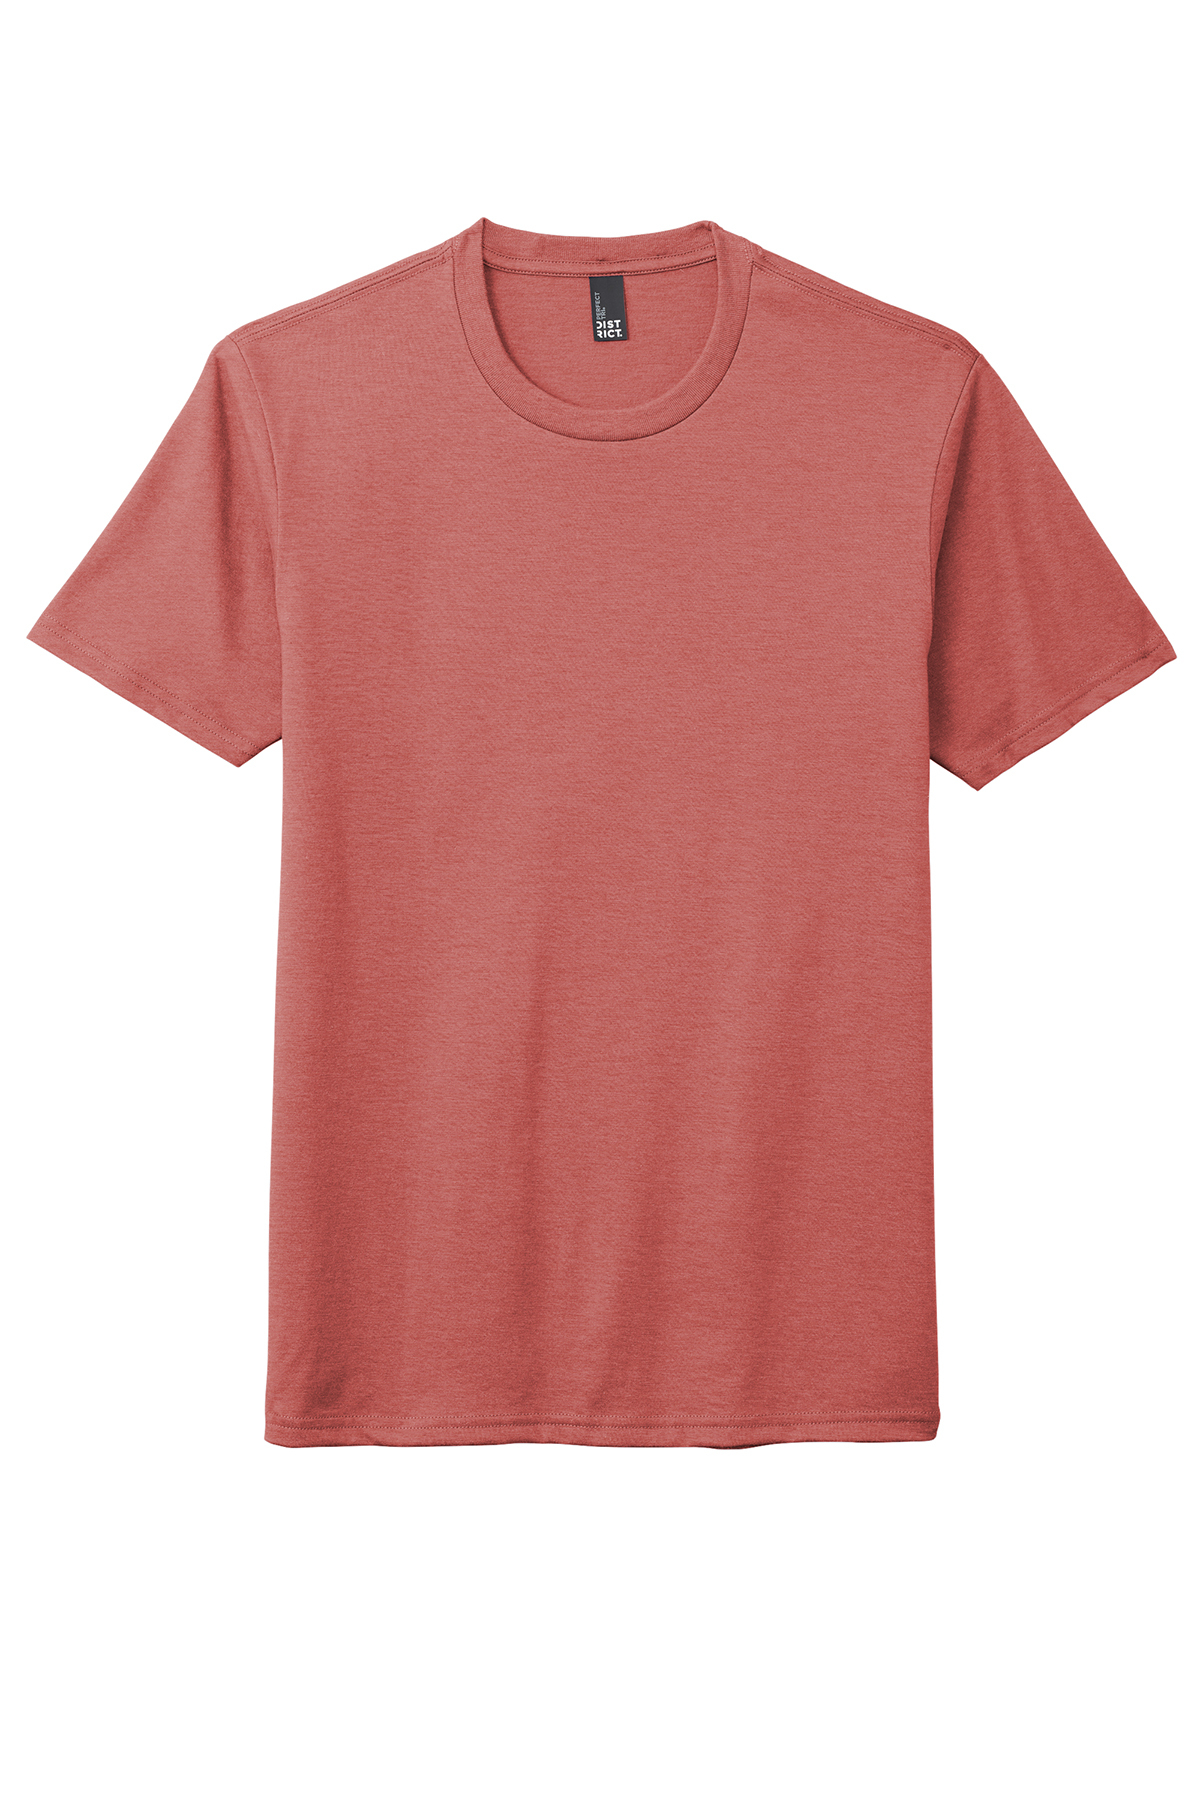 District Perfect Tri Tee | Product | District